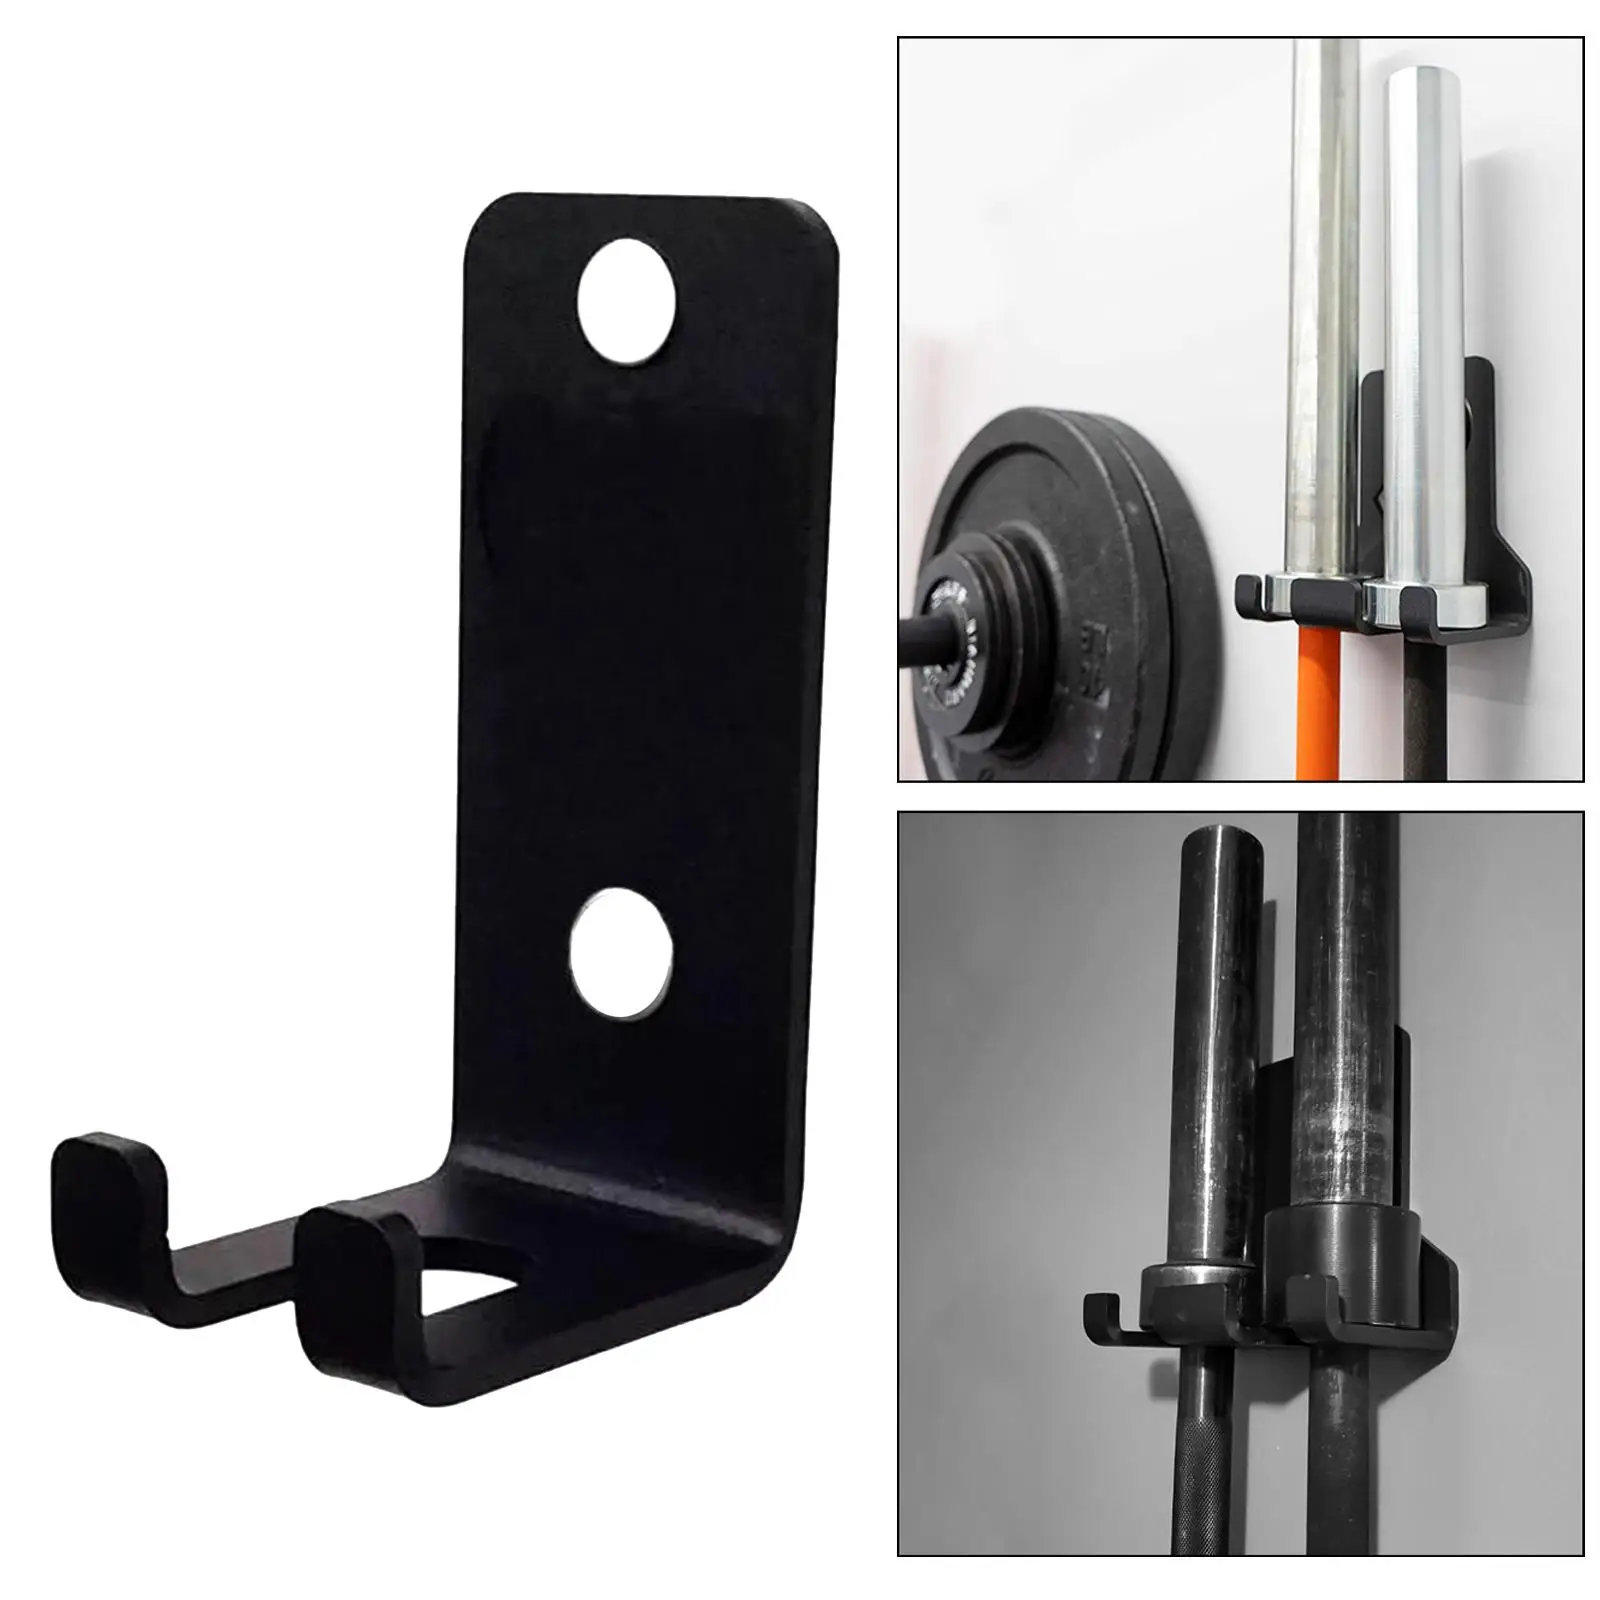 Heavy Duty Barbell Storage Rack Wall Hanger Bar Rack Display Bracket for Fitness Center Home Garage Gym Accessory Workout